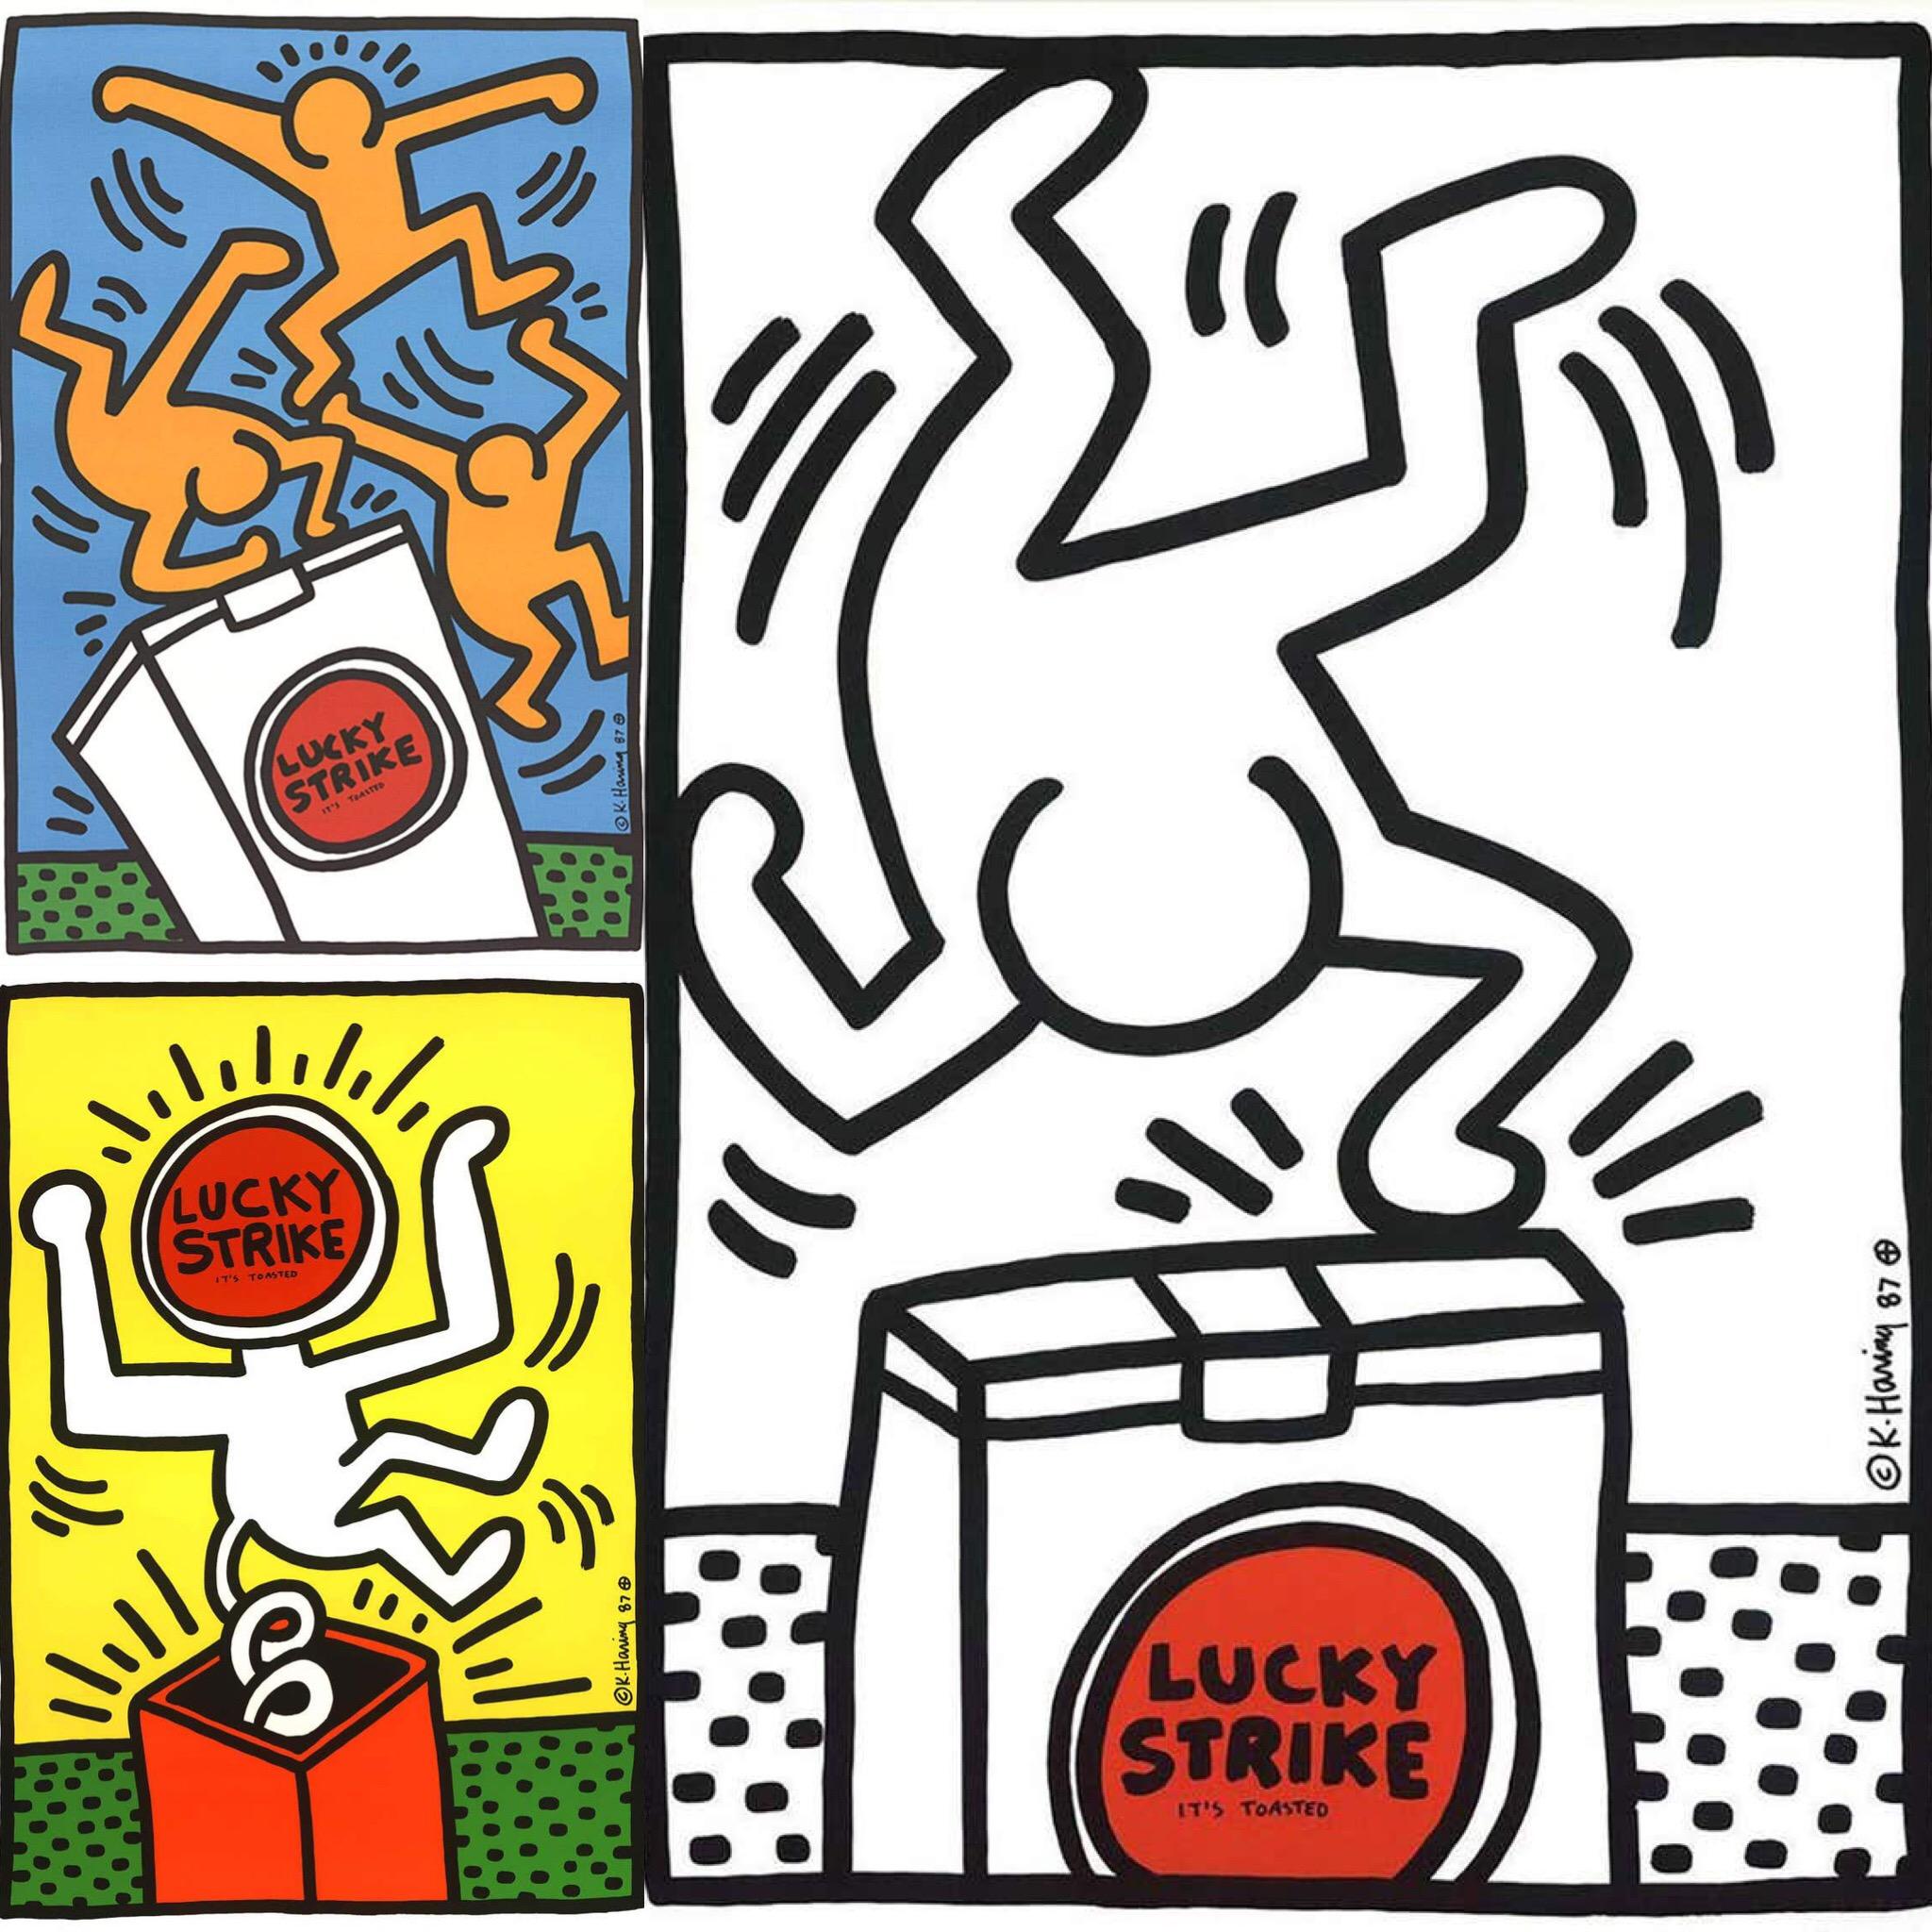 Vintage original Keith Haring Lucky Strike Screen-prints 1987: complete set of 3.

"The advertising posters for Lucky Strike cigarettes reflect the popular Montreux posters from 1983. According to the imprint, they were commissioned by Lucky Strike